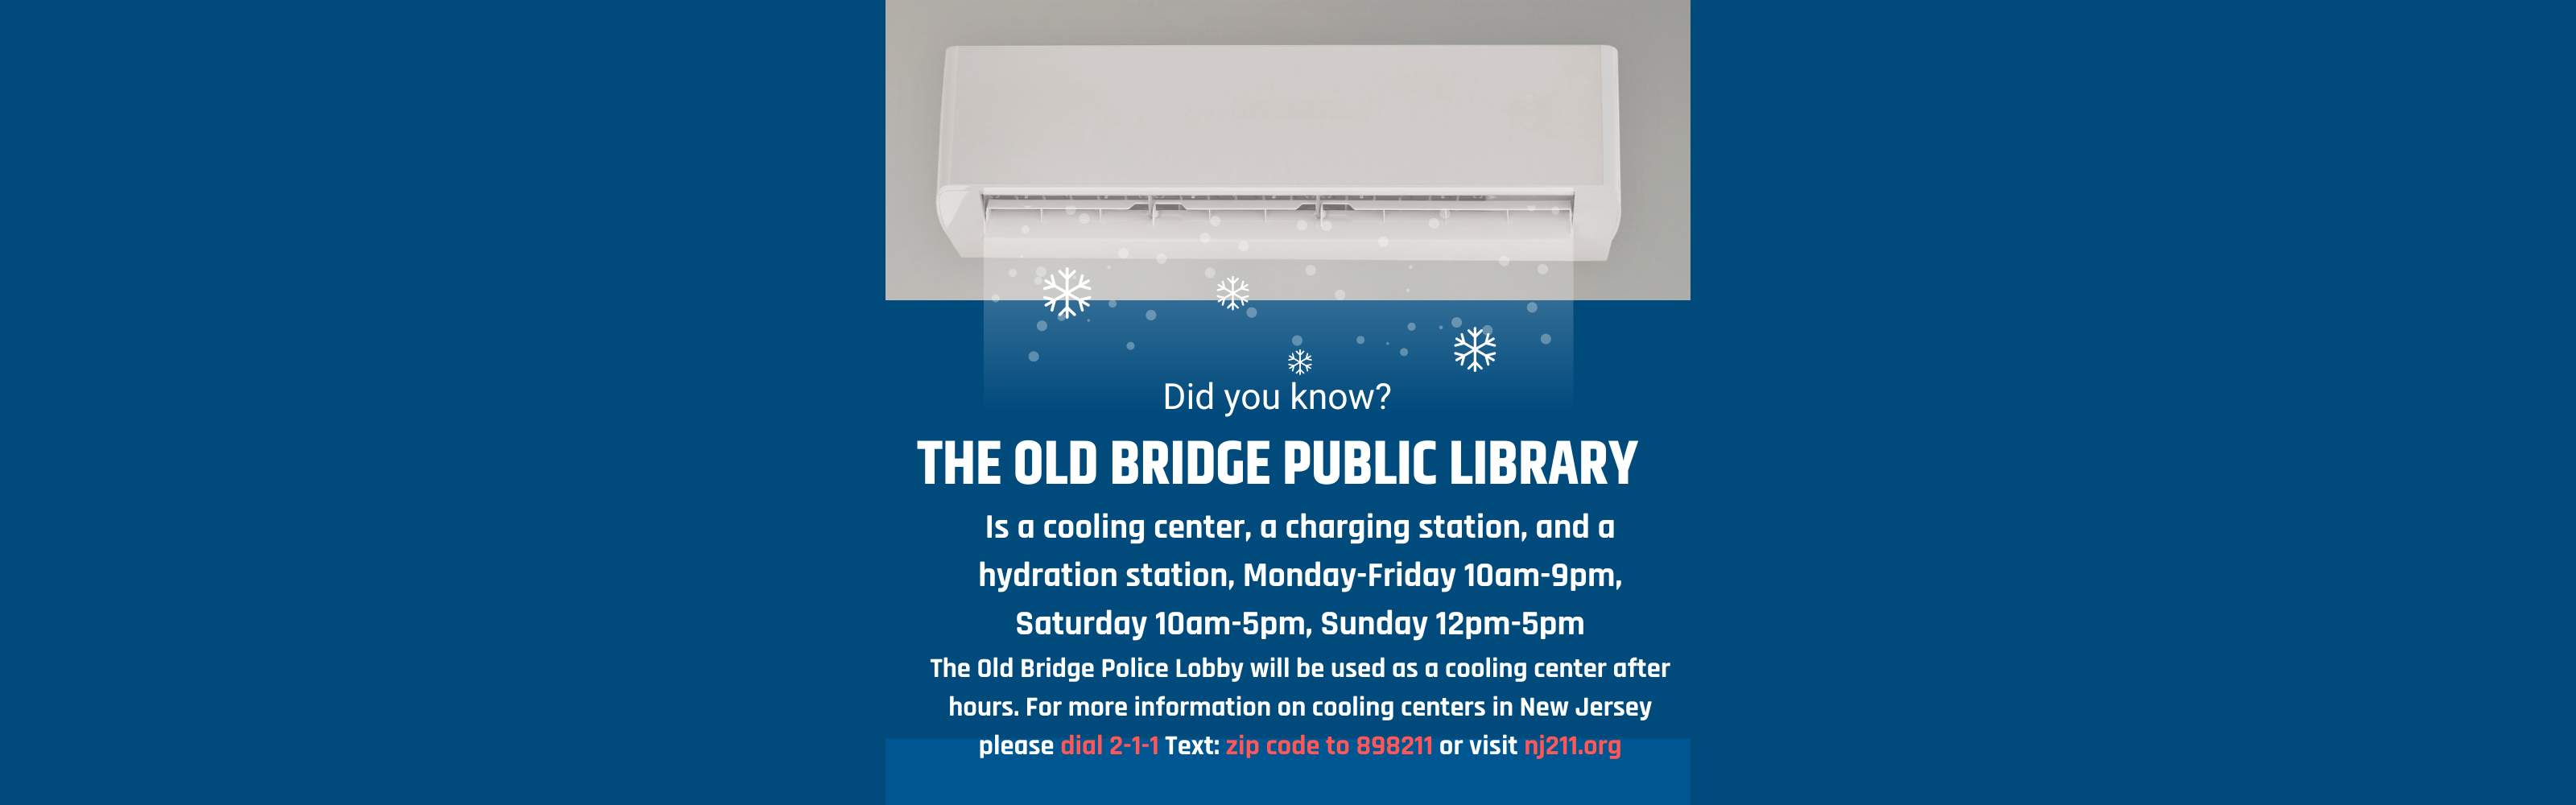 Image of an air conditioner says the Old Bridge Public Library is a cooling center, a charging station and a hydration station during its regular hours